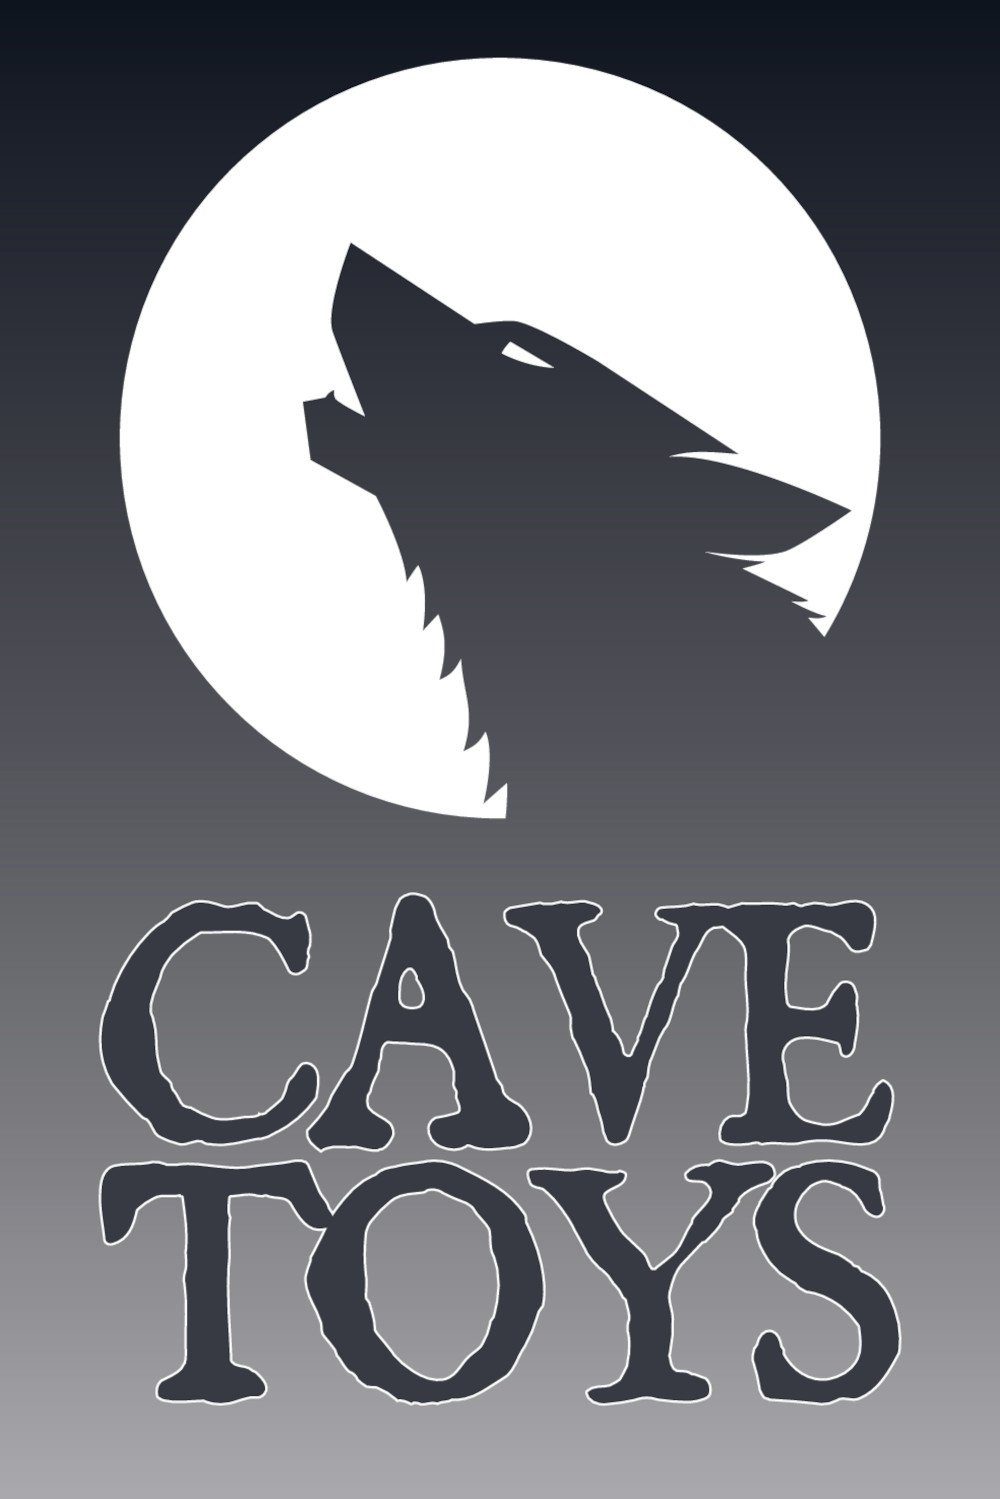 Cave Toys